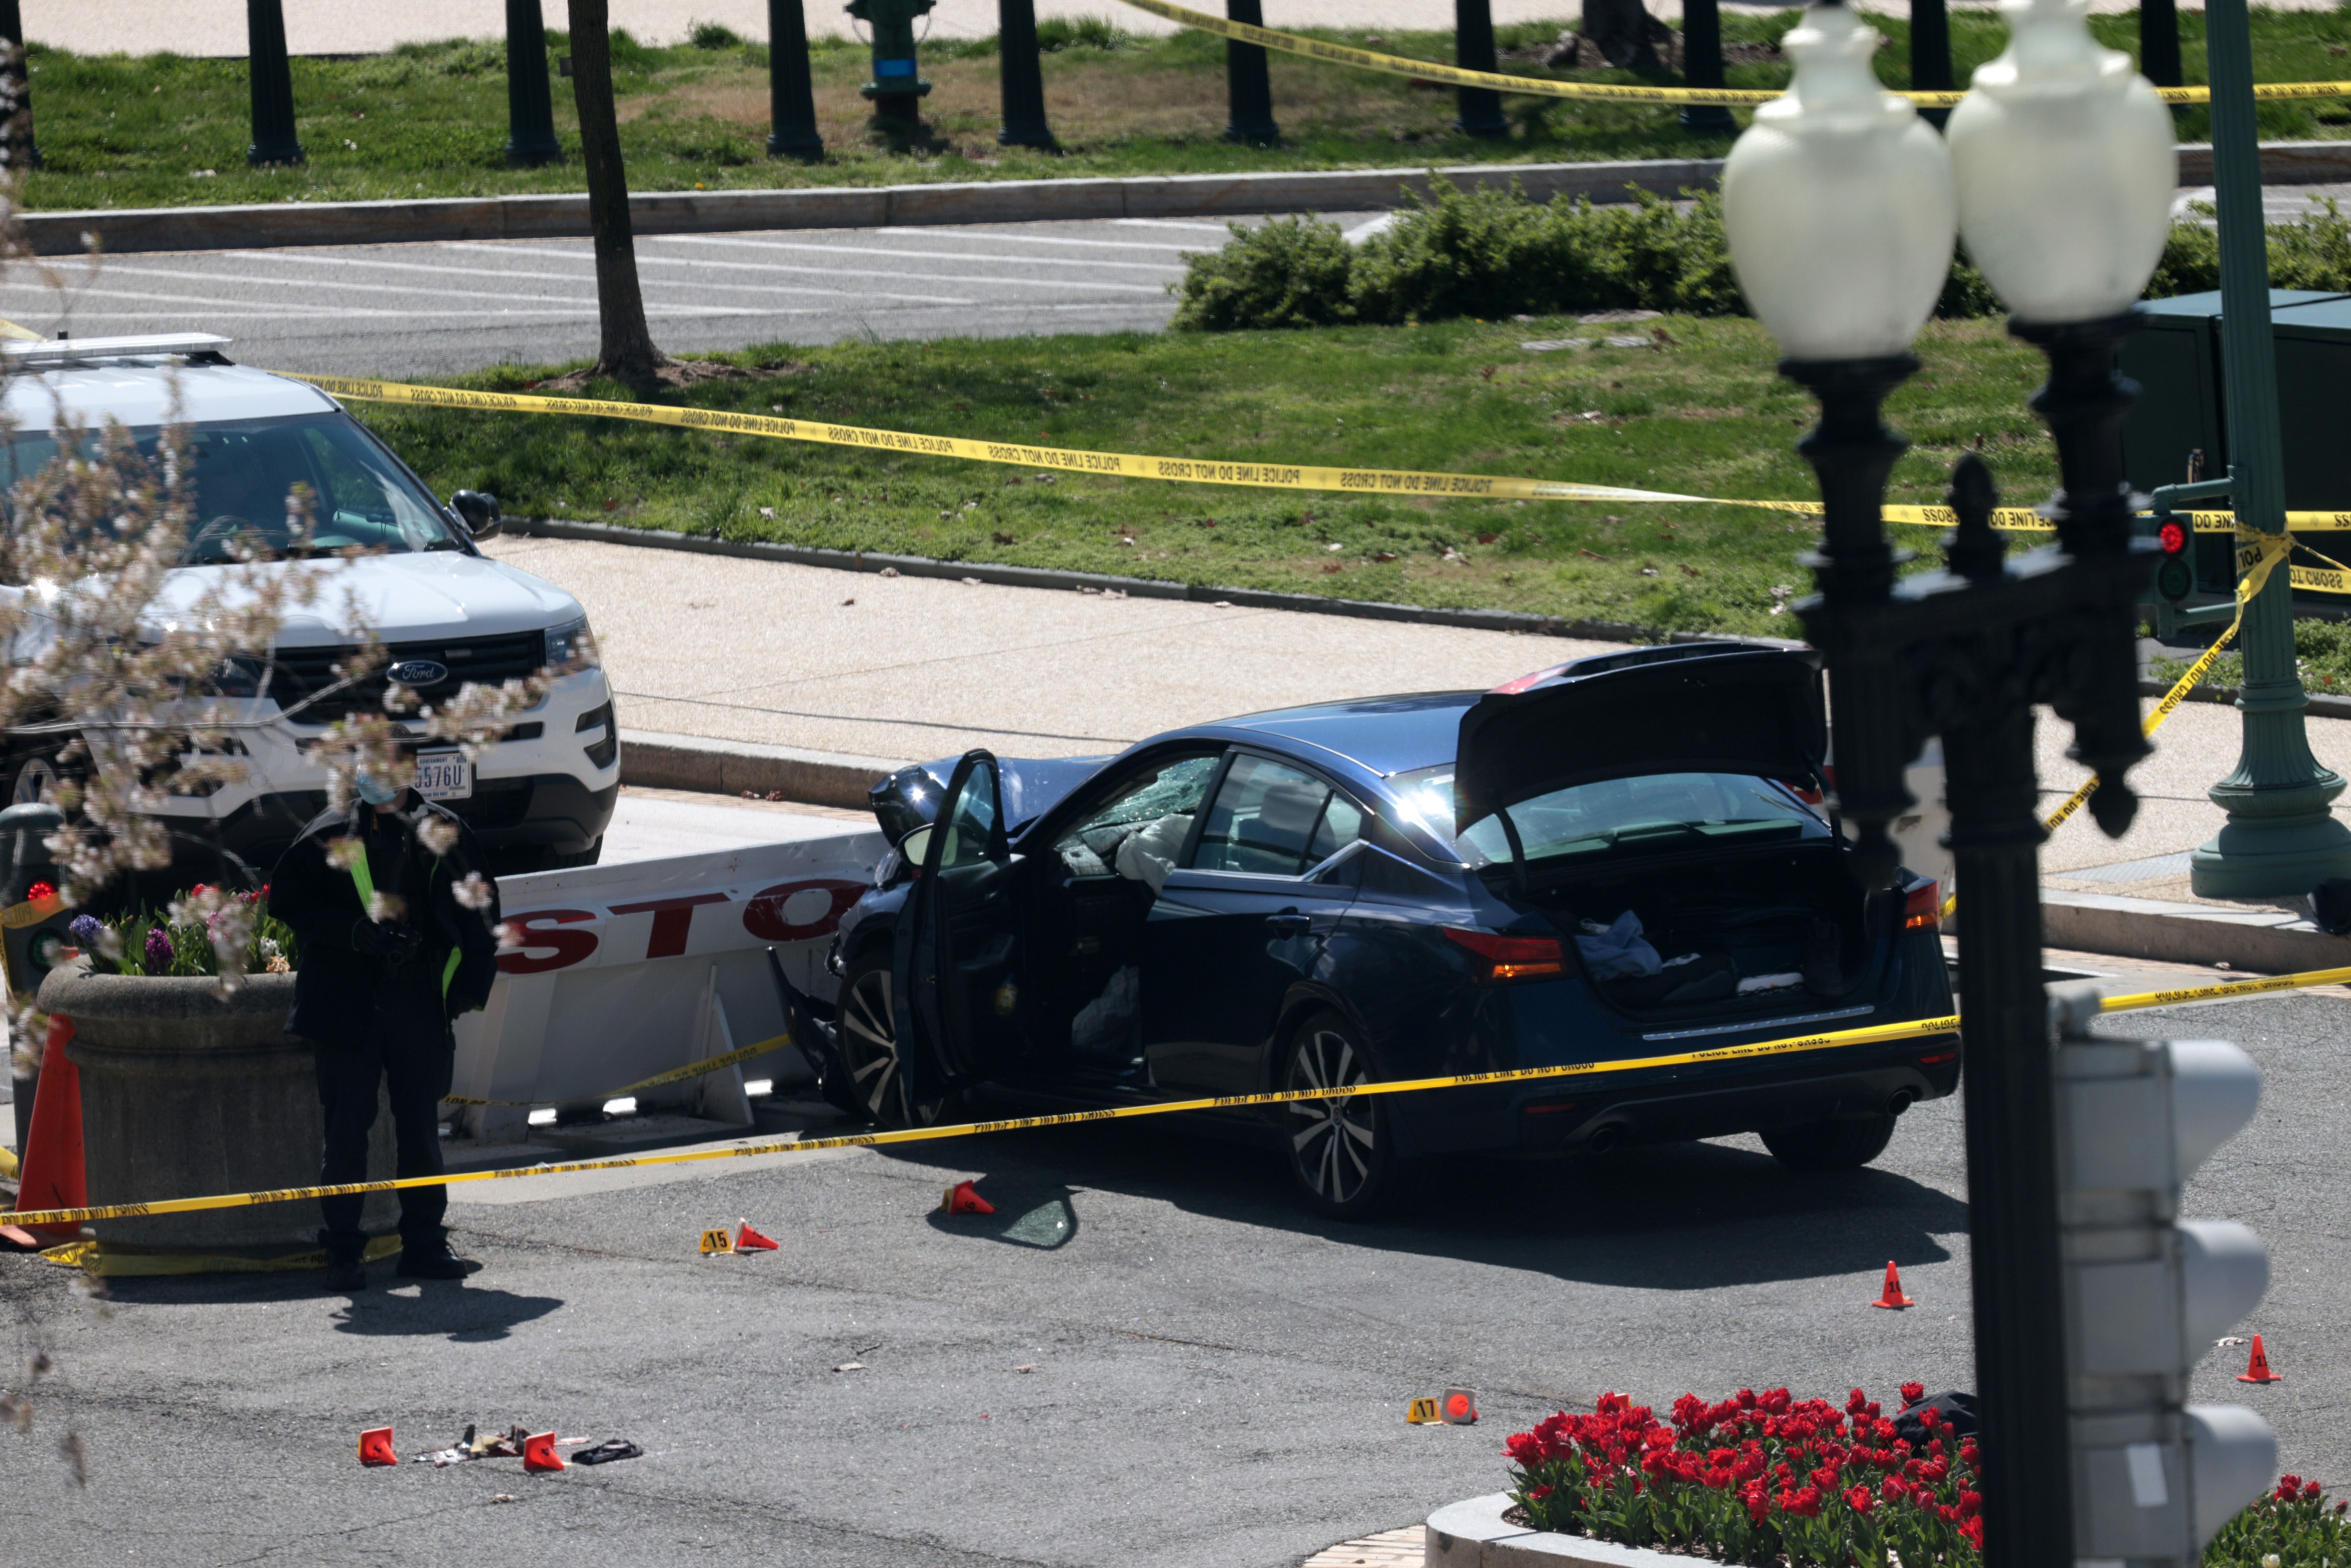 Another view of the vehicle smashed into the barricade at the U.S. Capitol on April 2. 